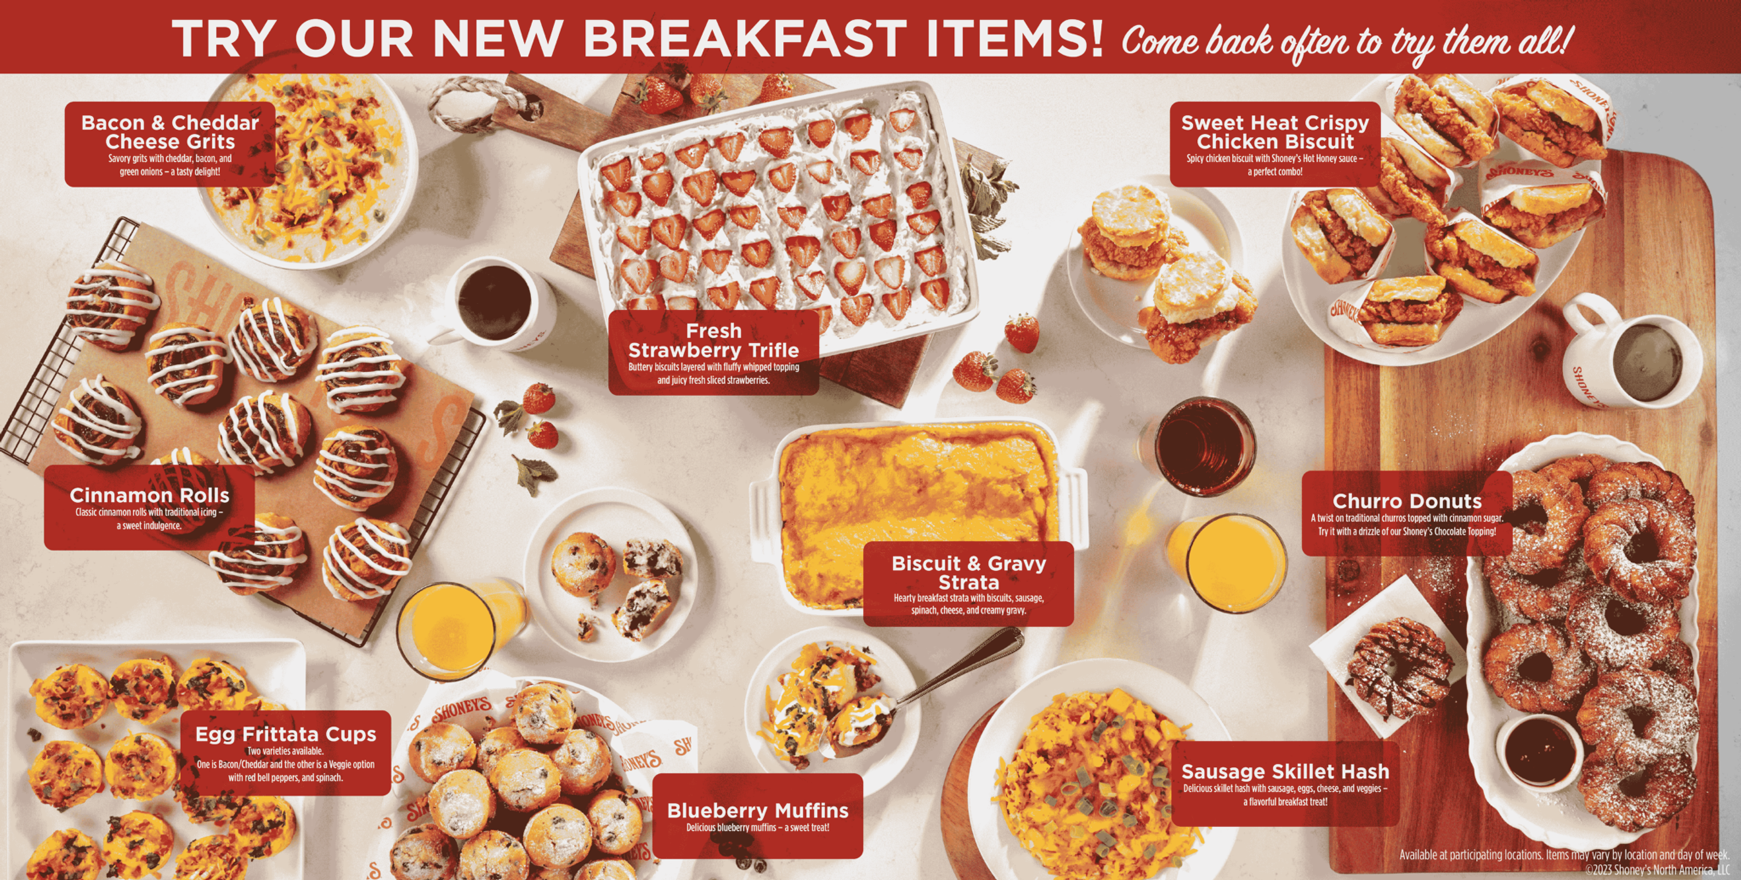 Does Shoney's Have a Breakfast Buffet? Find Out Now!